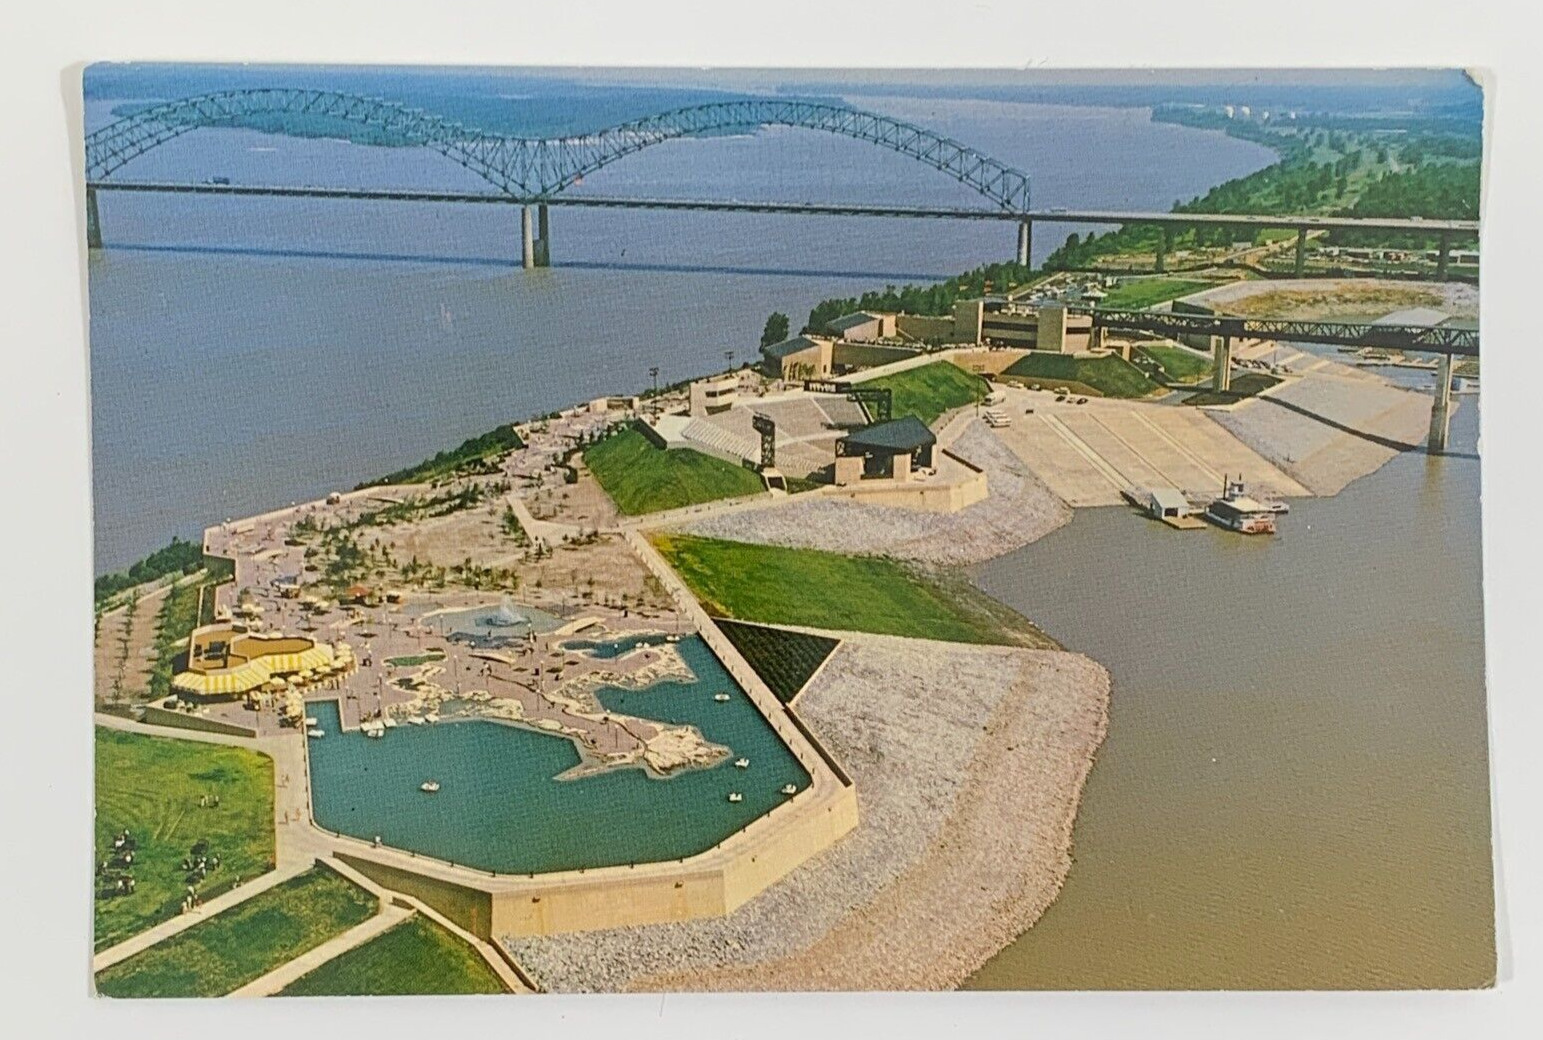 Northwest view of Mud Island Memphis Tennessee Postcard Unposted Aerial View